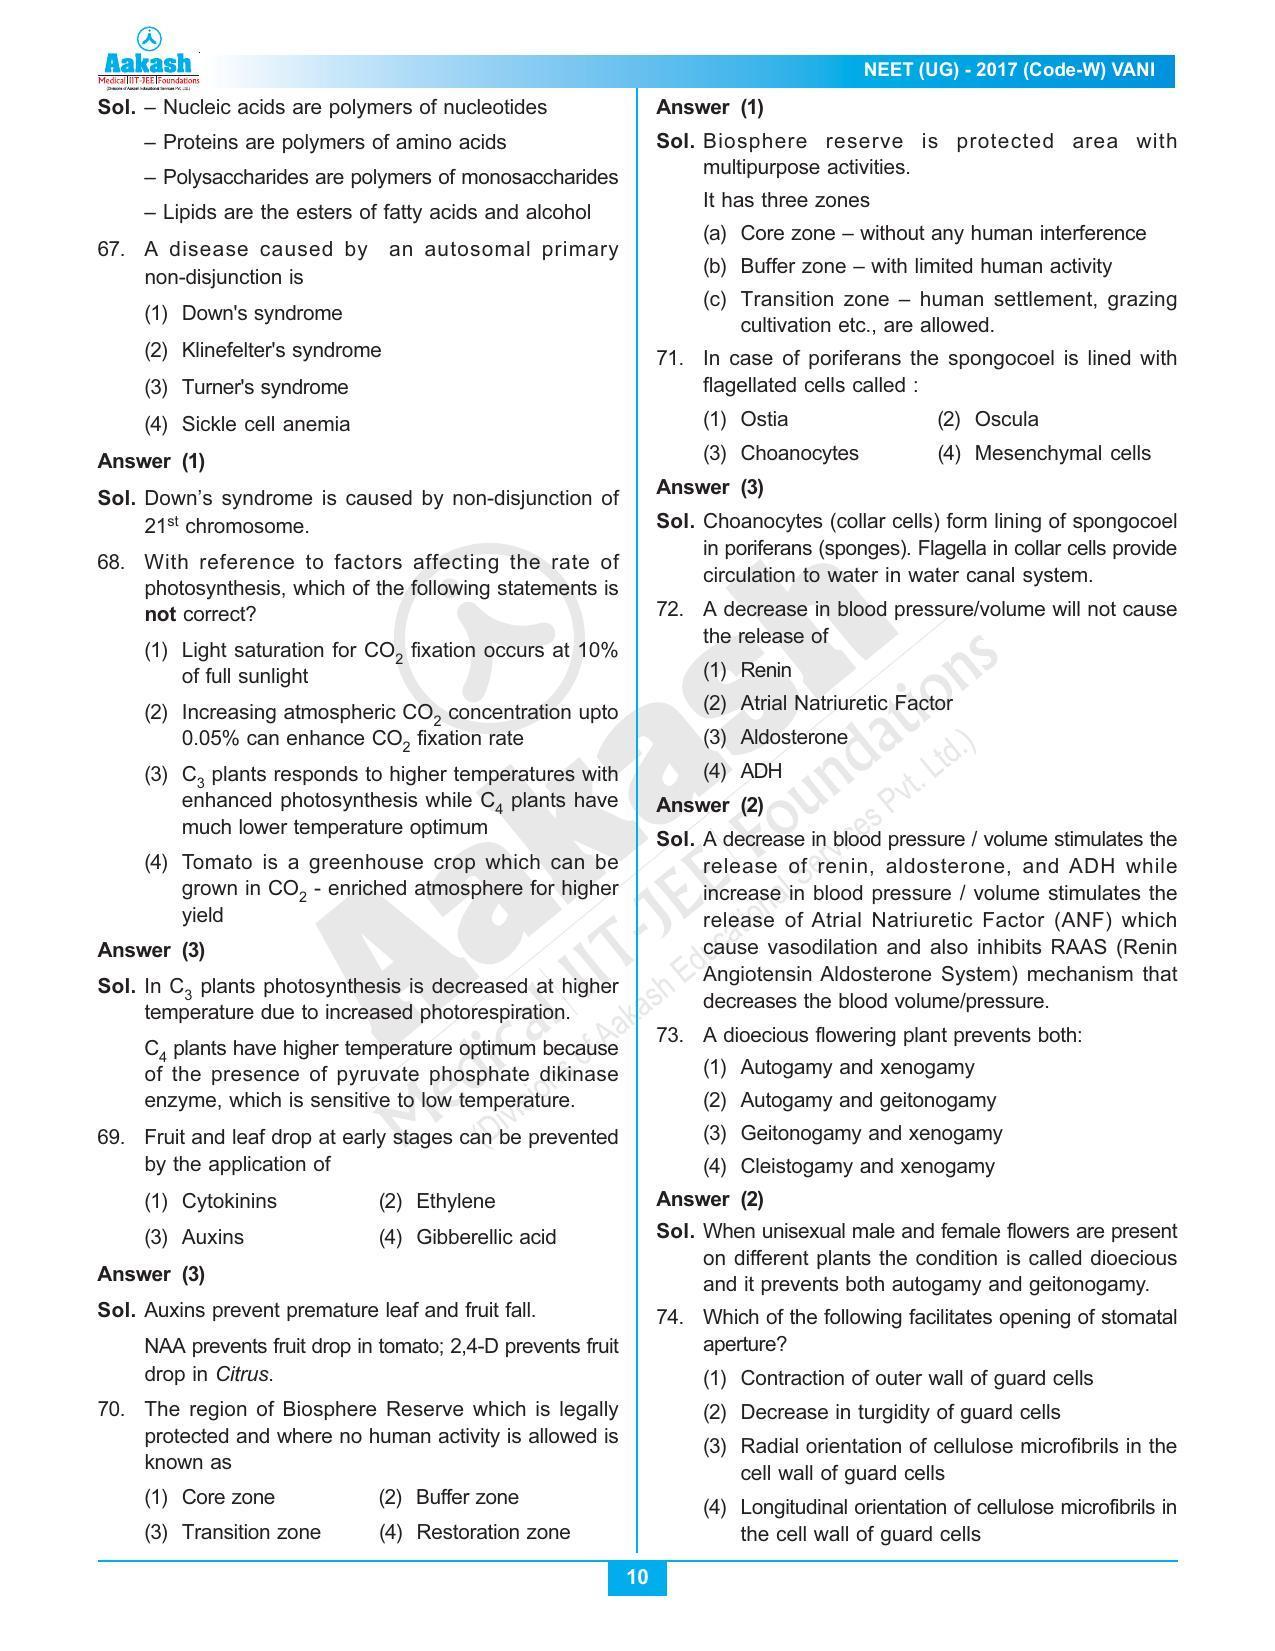  NEET Code W 2017 Answer & Solutions - Page 10